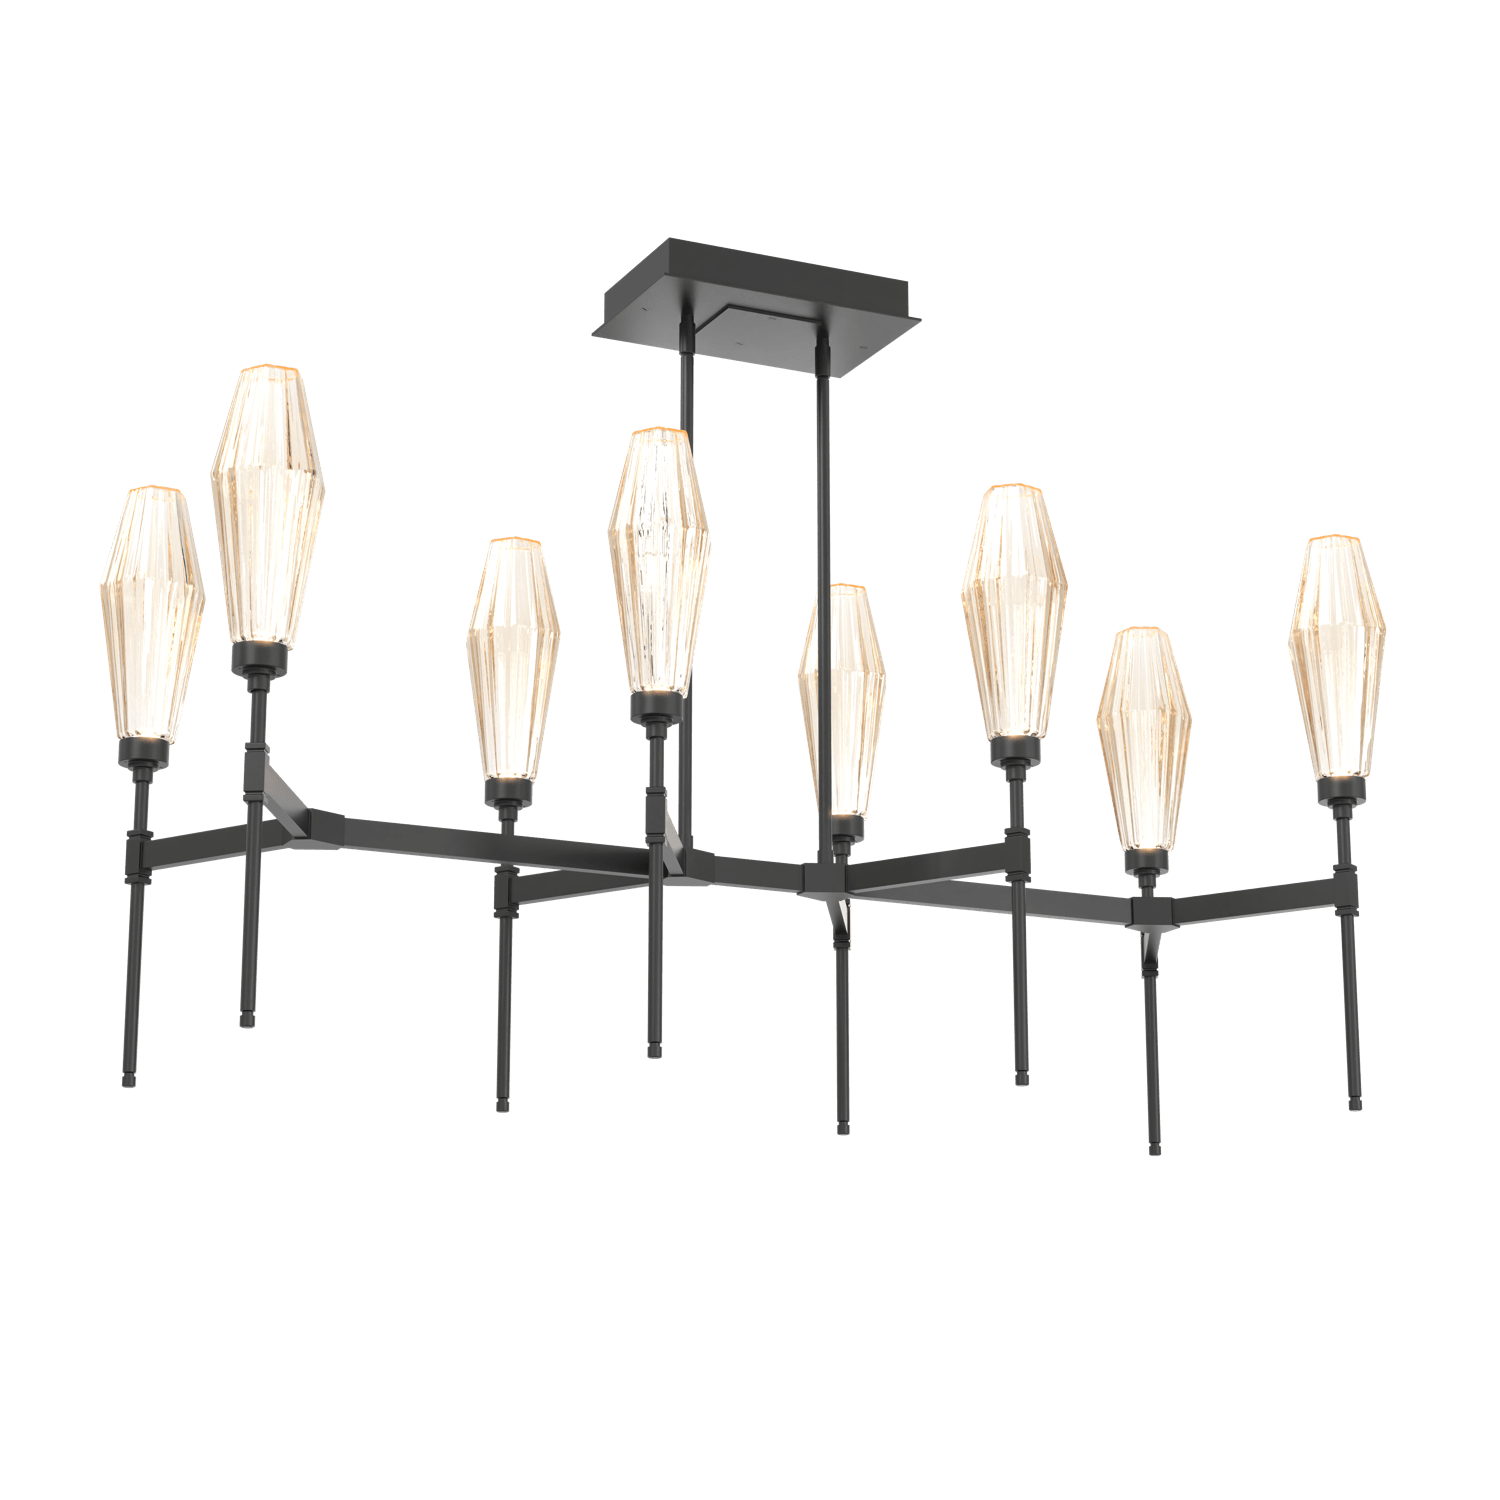 PLB0049-48-MB-RA-Hammerton-Studio-Aalto-48-inch-linear-belvedere-chandelier-with-matte-black-finish-and-optic-ribbed-amber-glass-shades-and-LED-lamping